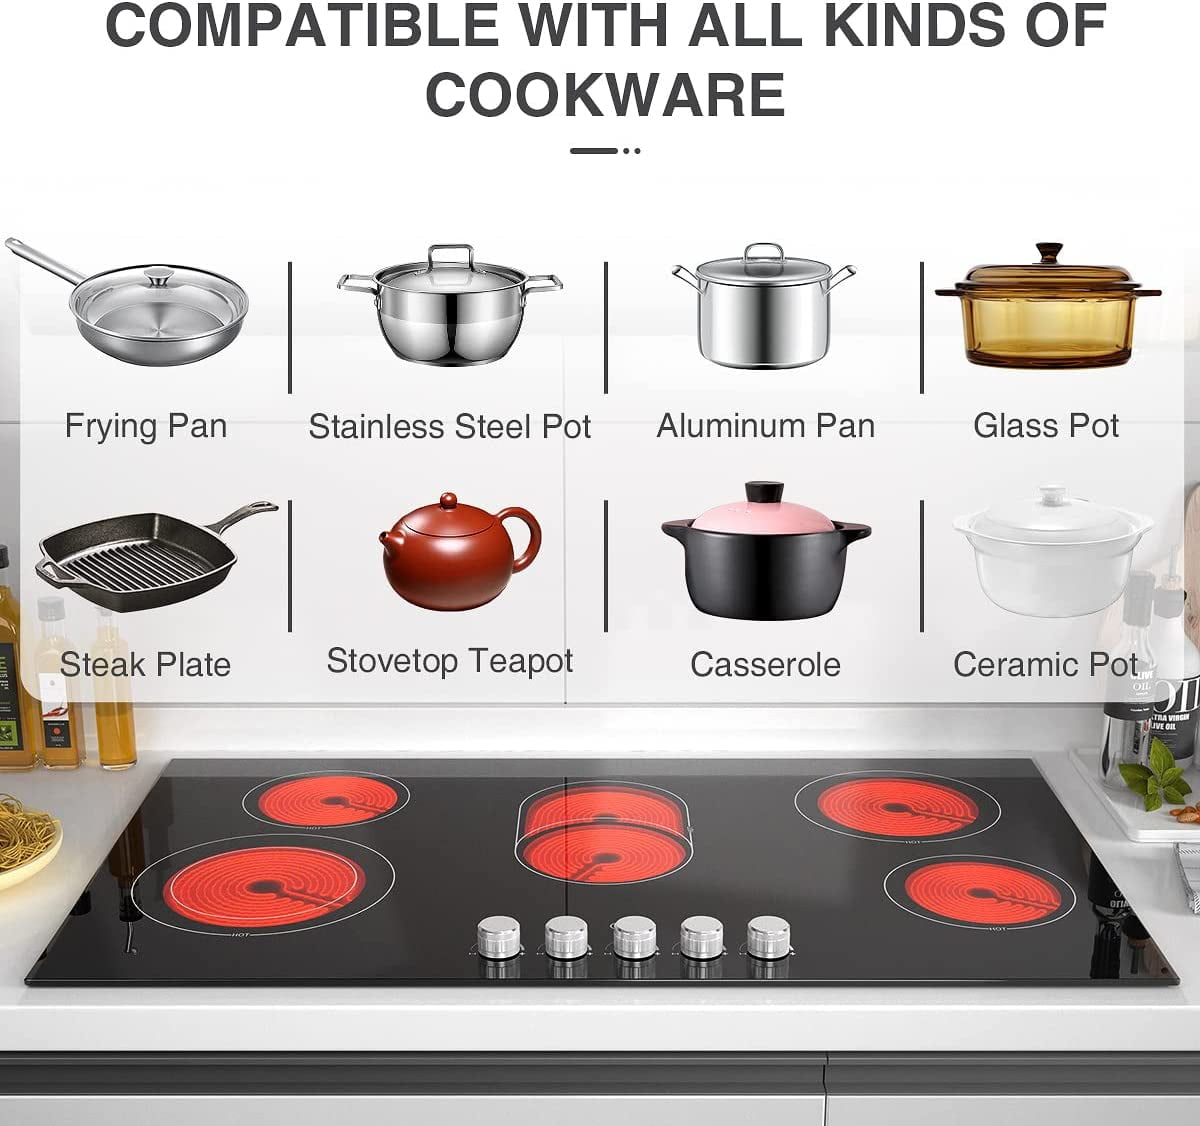 What is the Difference Between Hotplate and Induction Cooker